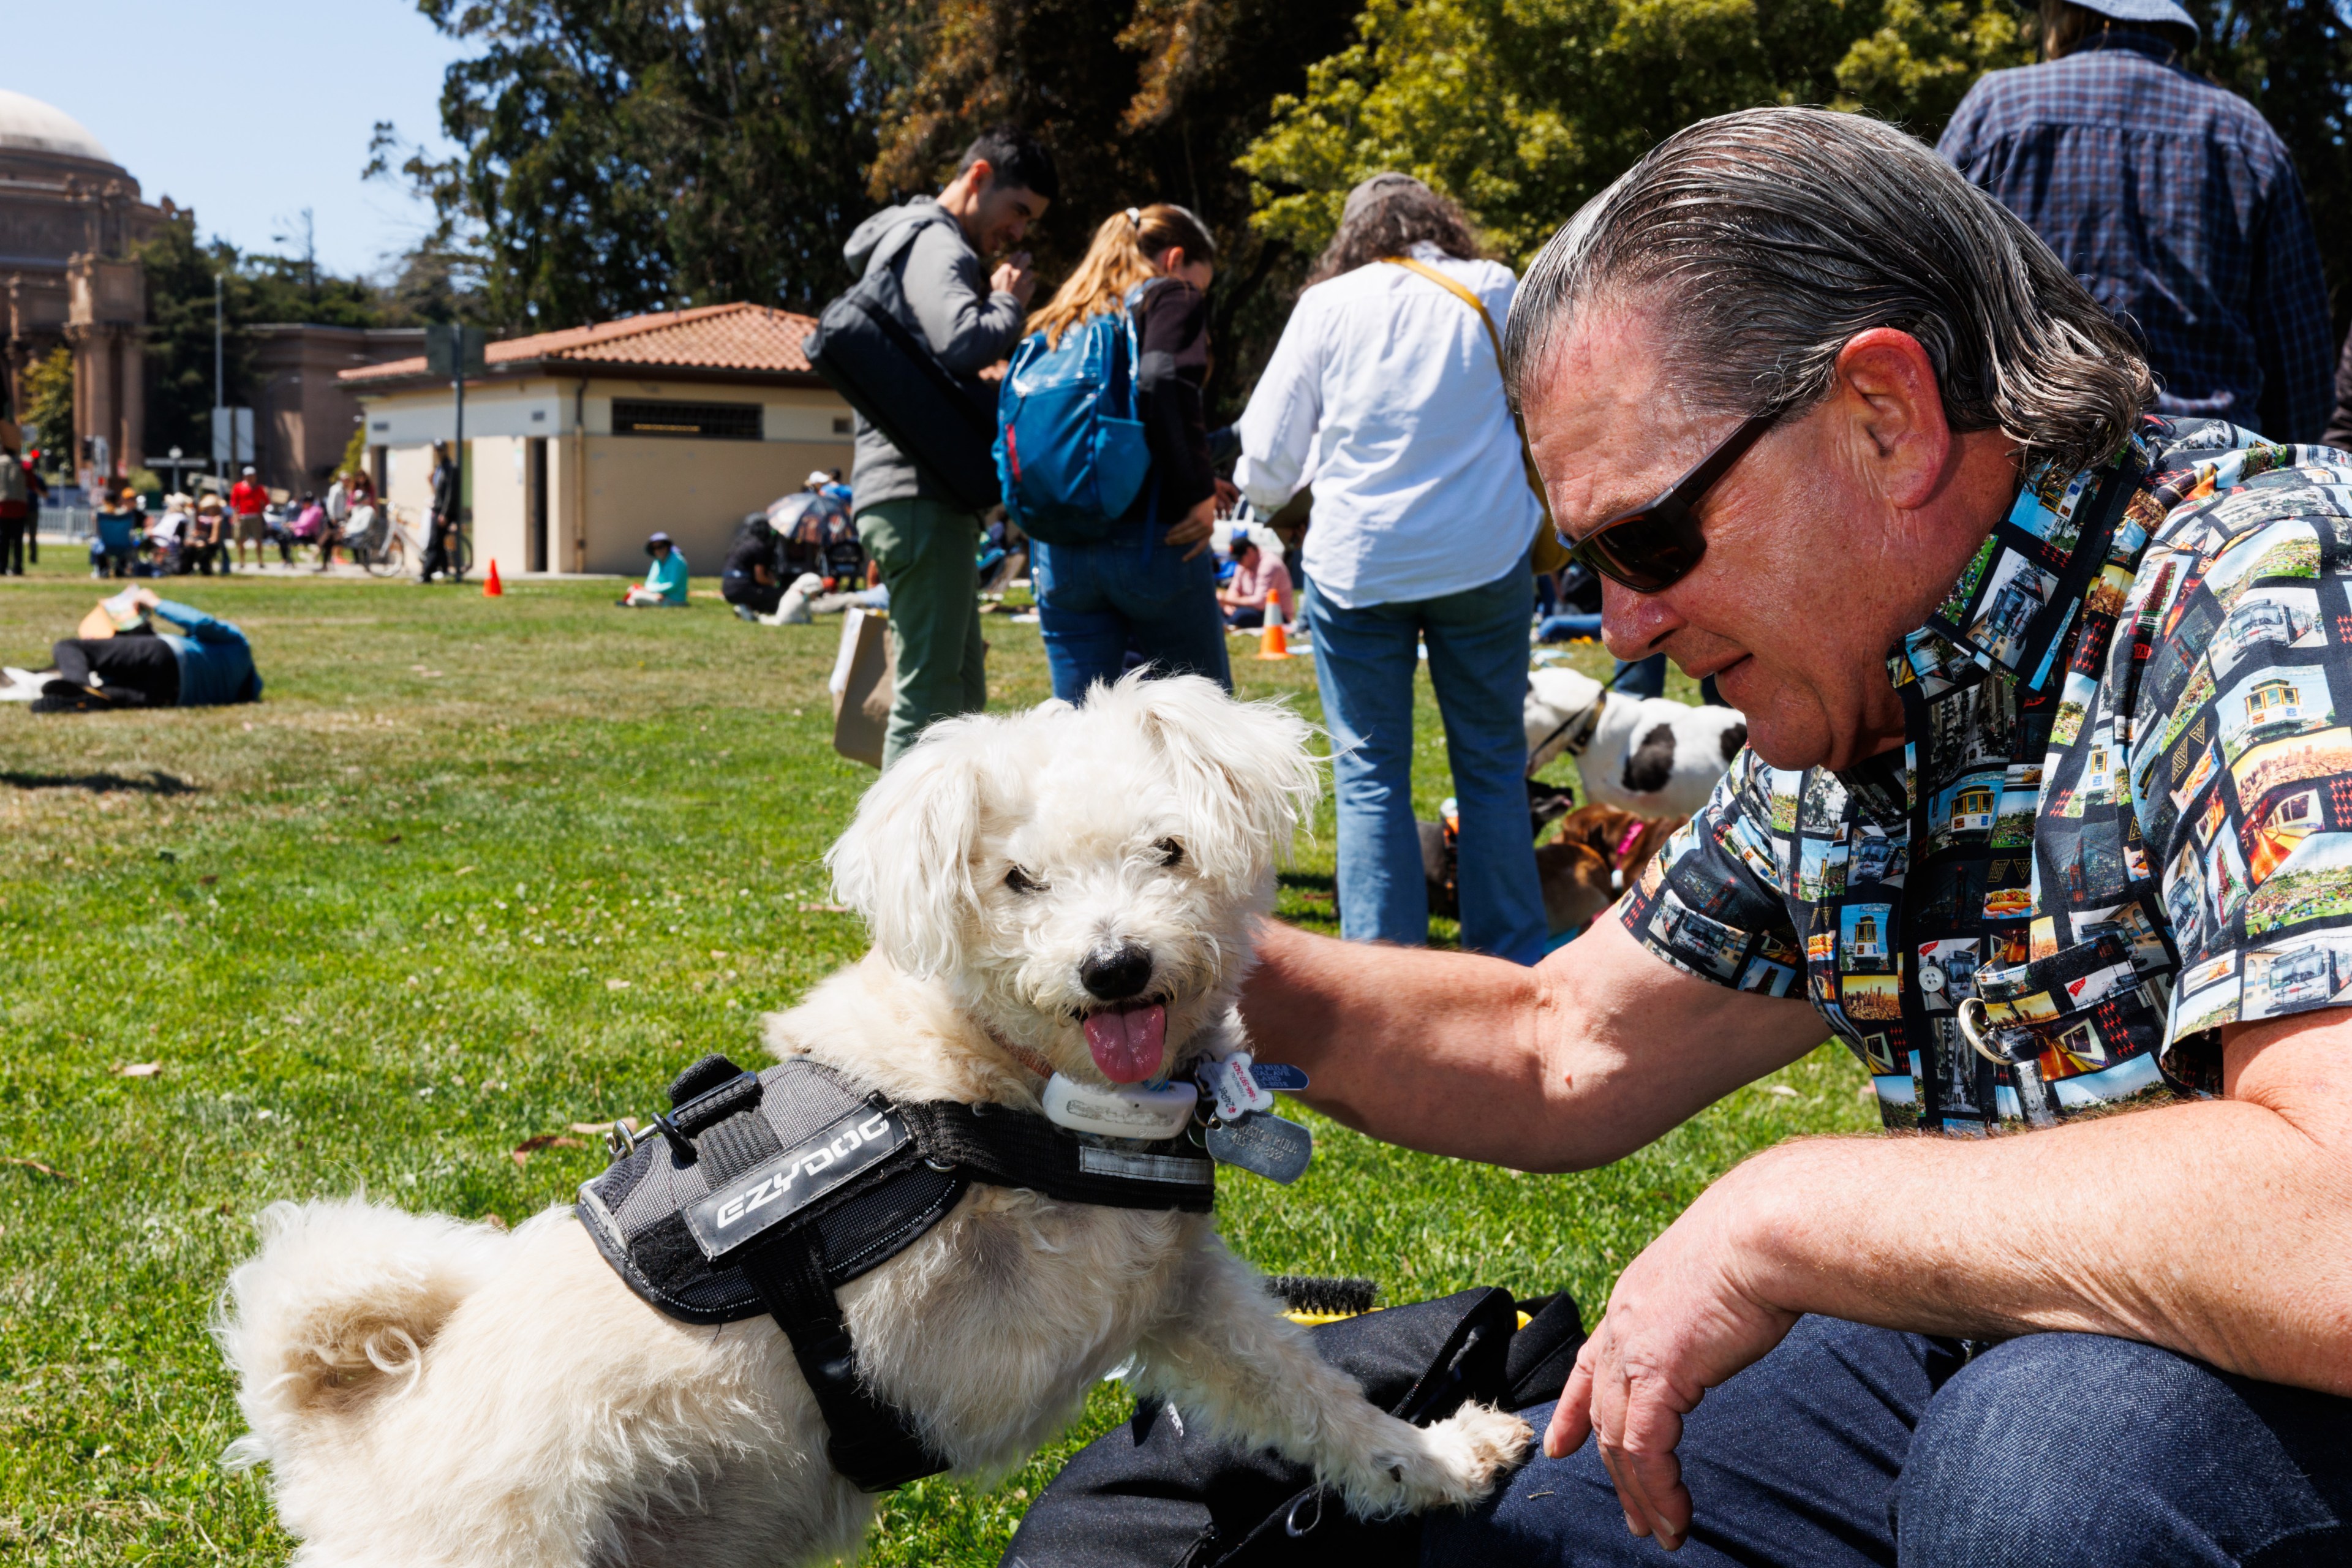 An older man wearing sunglasses and a patterned shirt pets a small, white dog on a grassy field, with other people and dogs visible in the background.